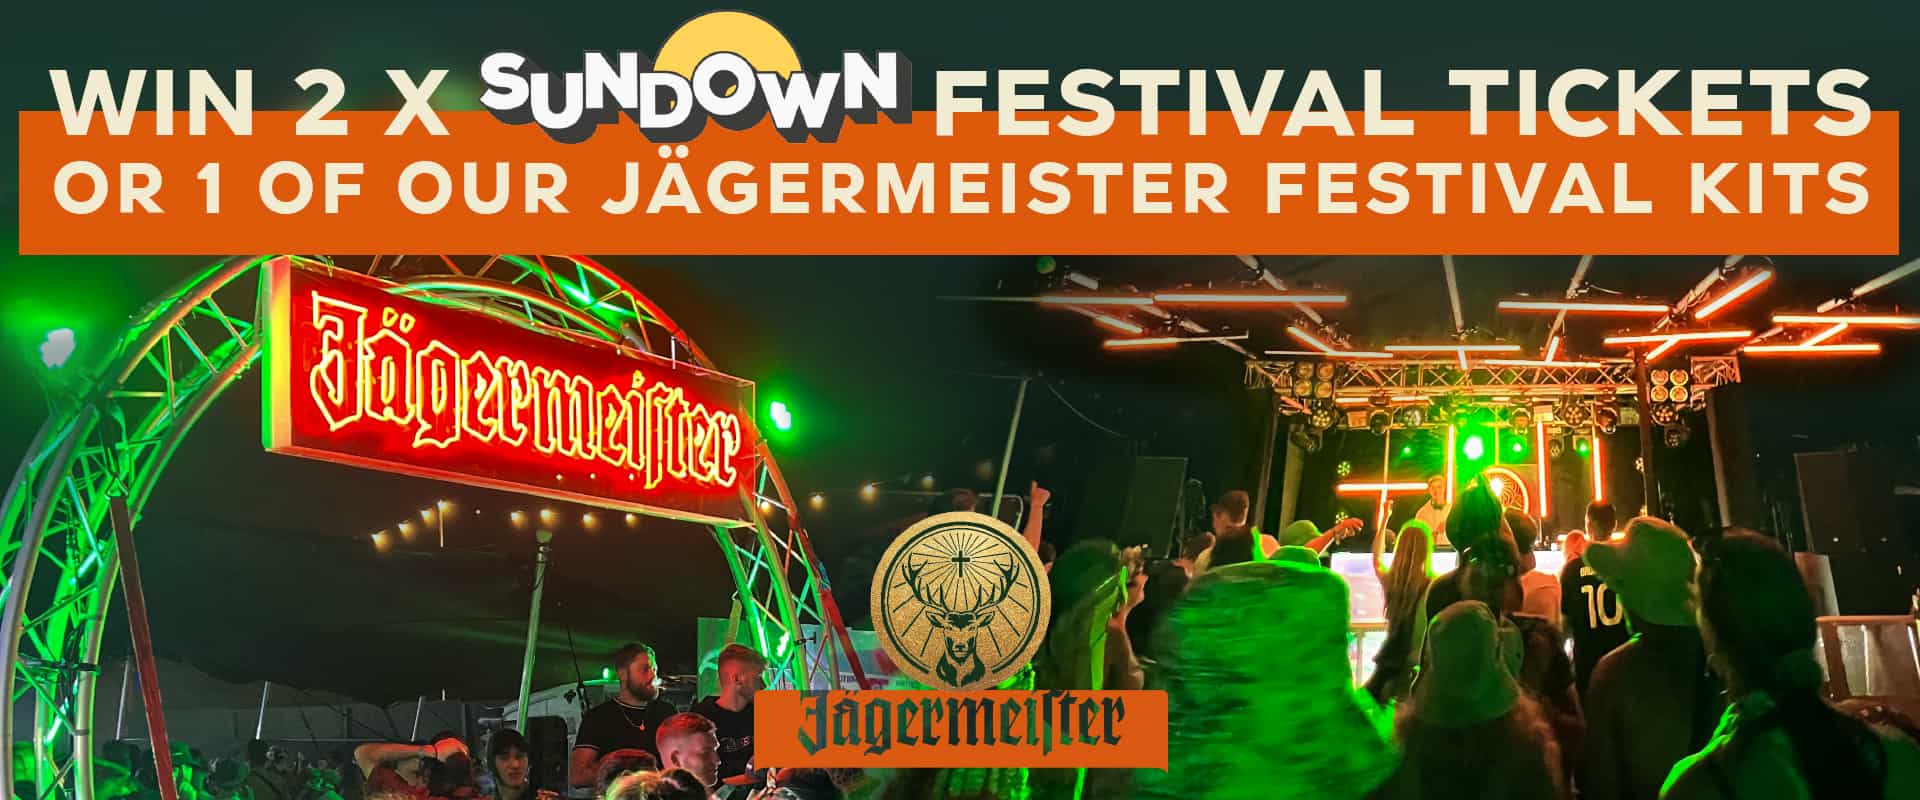 Win 2 tickets to Sundown Festival with Jagermeister and Fever Derby